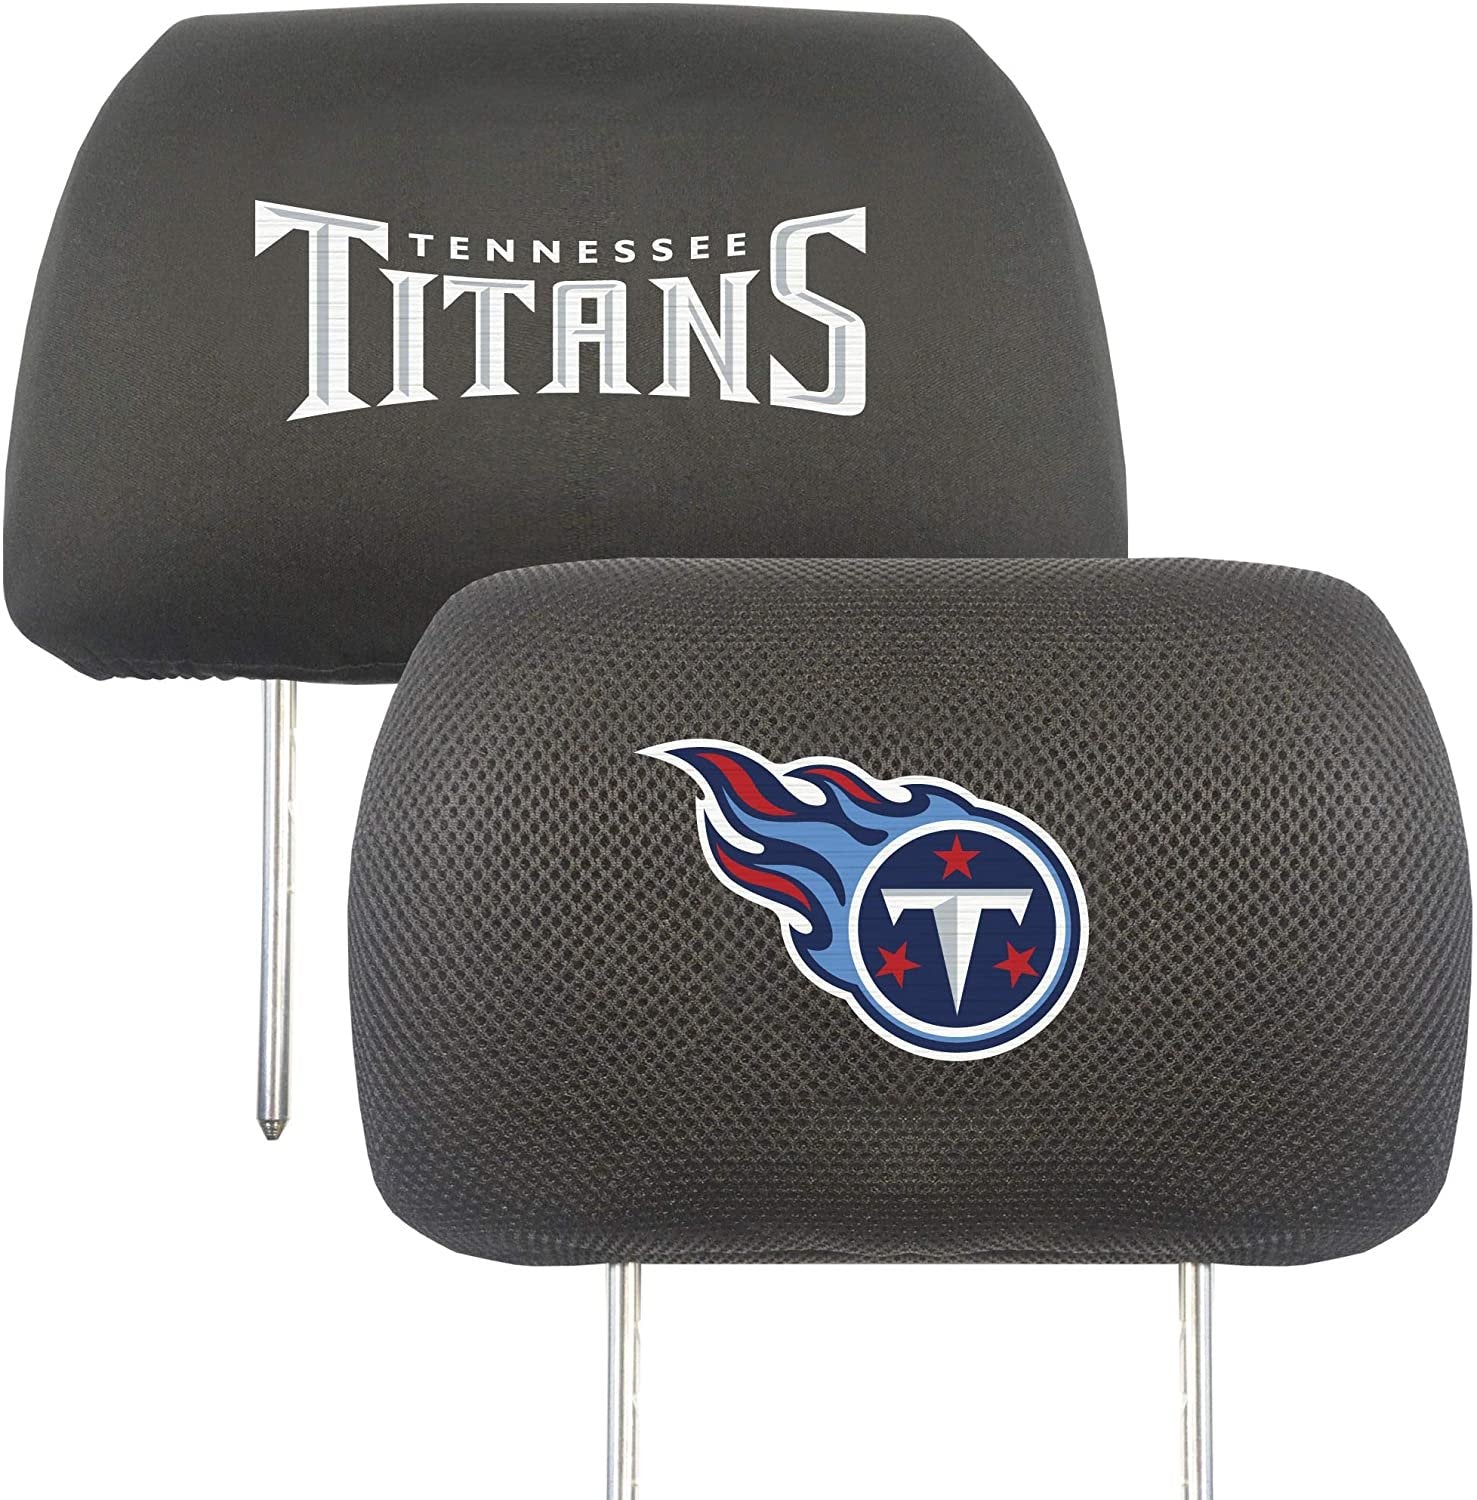 Tennessee Titans Pair of Premium Auto Head Rest Covers, Embroidered, Black Elastic, 14x10 Inch